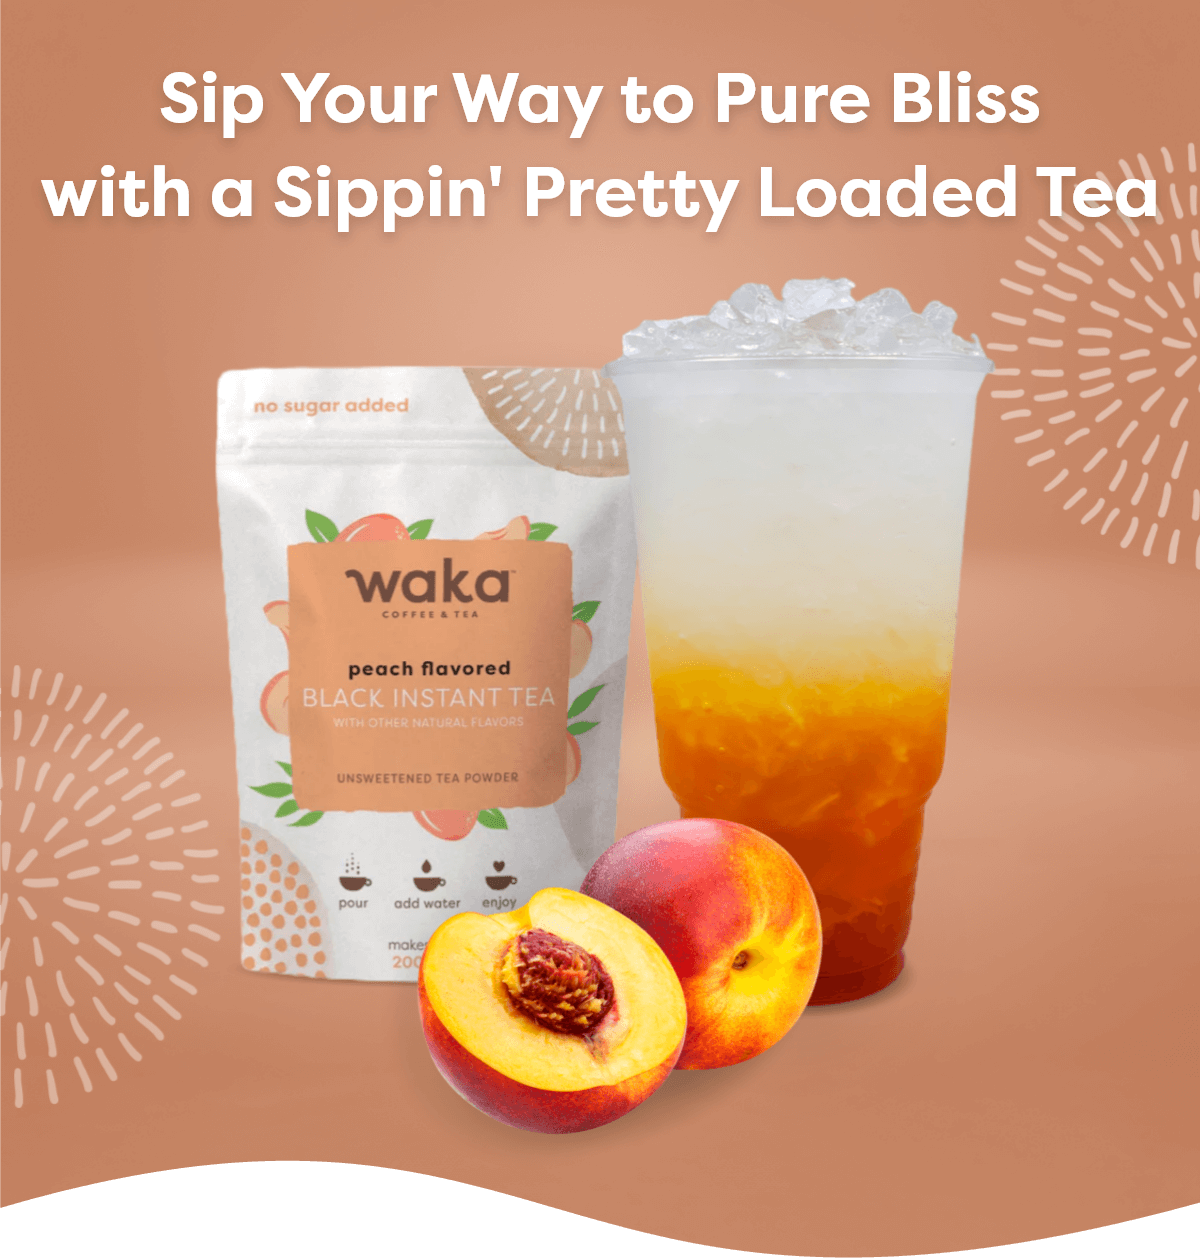 Sip Your Way to Pure Bliss with a Sippin' Pretty Loaded Tea